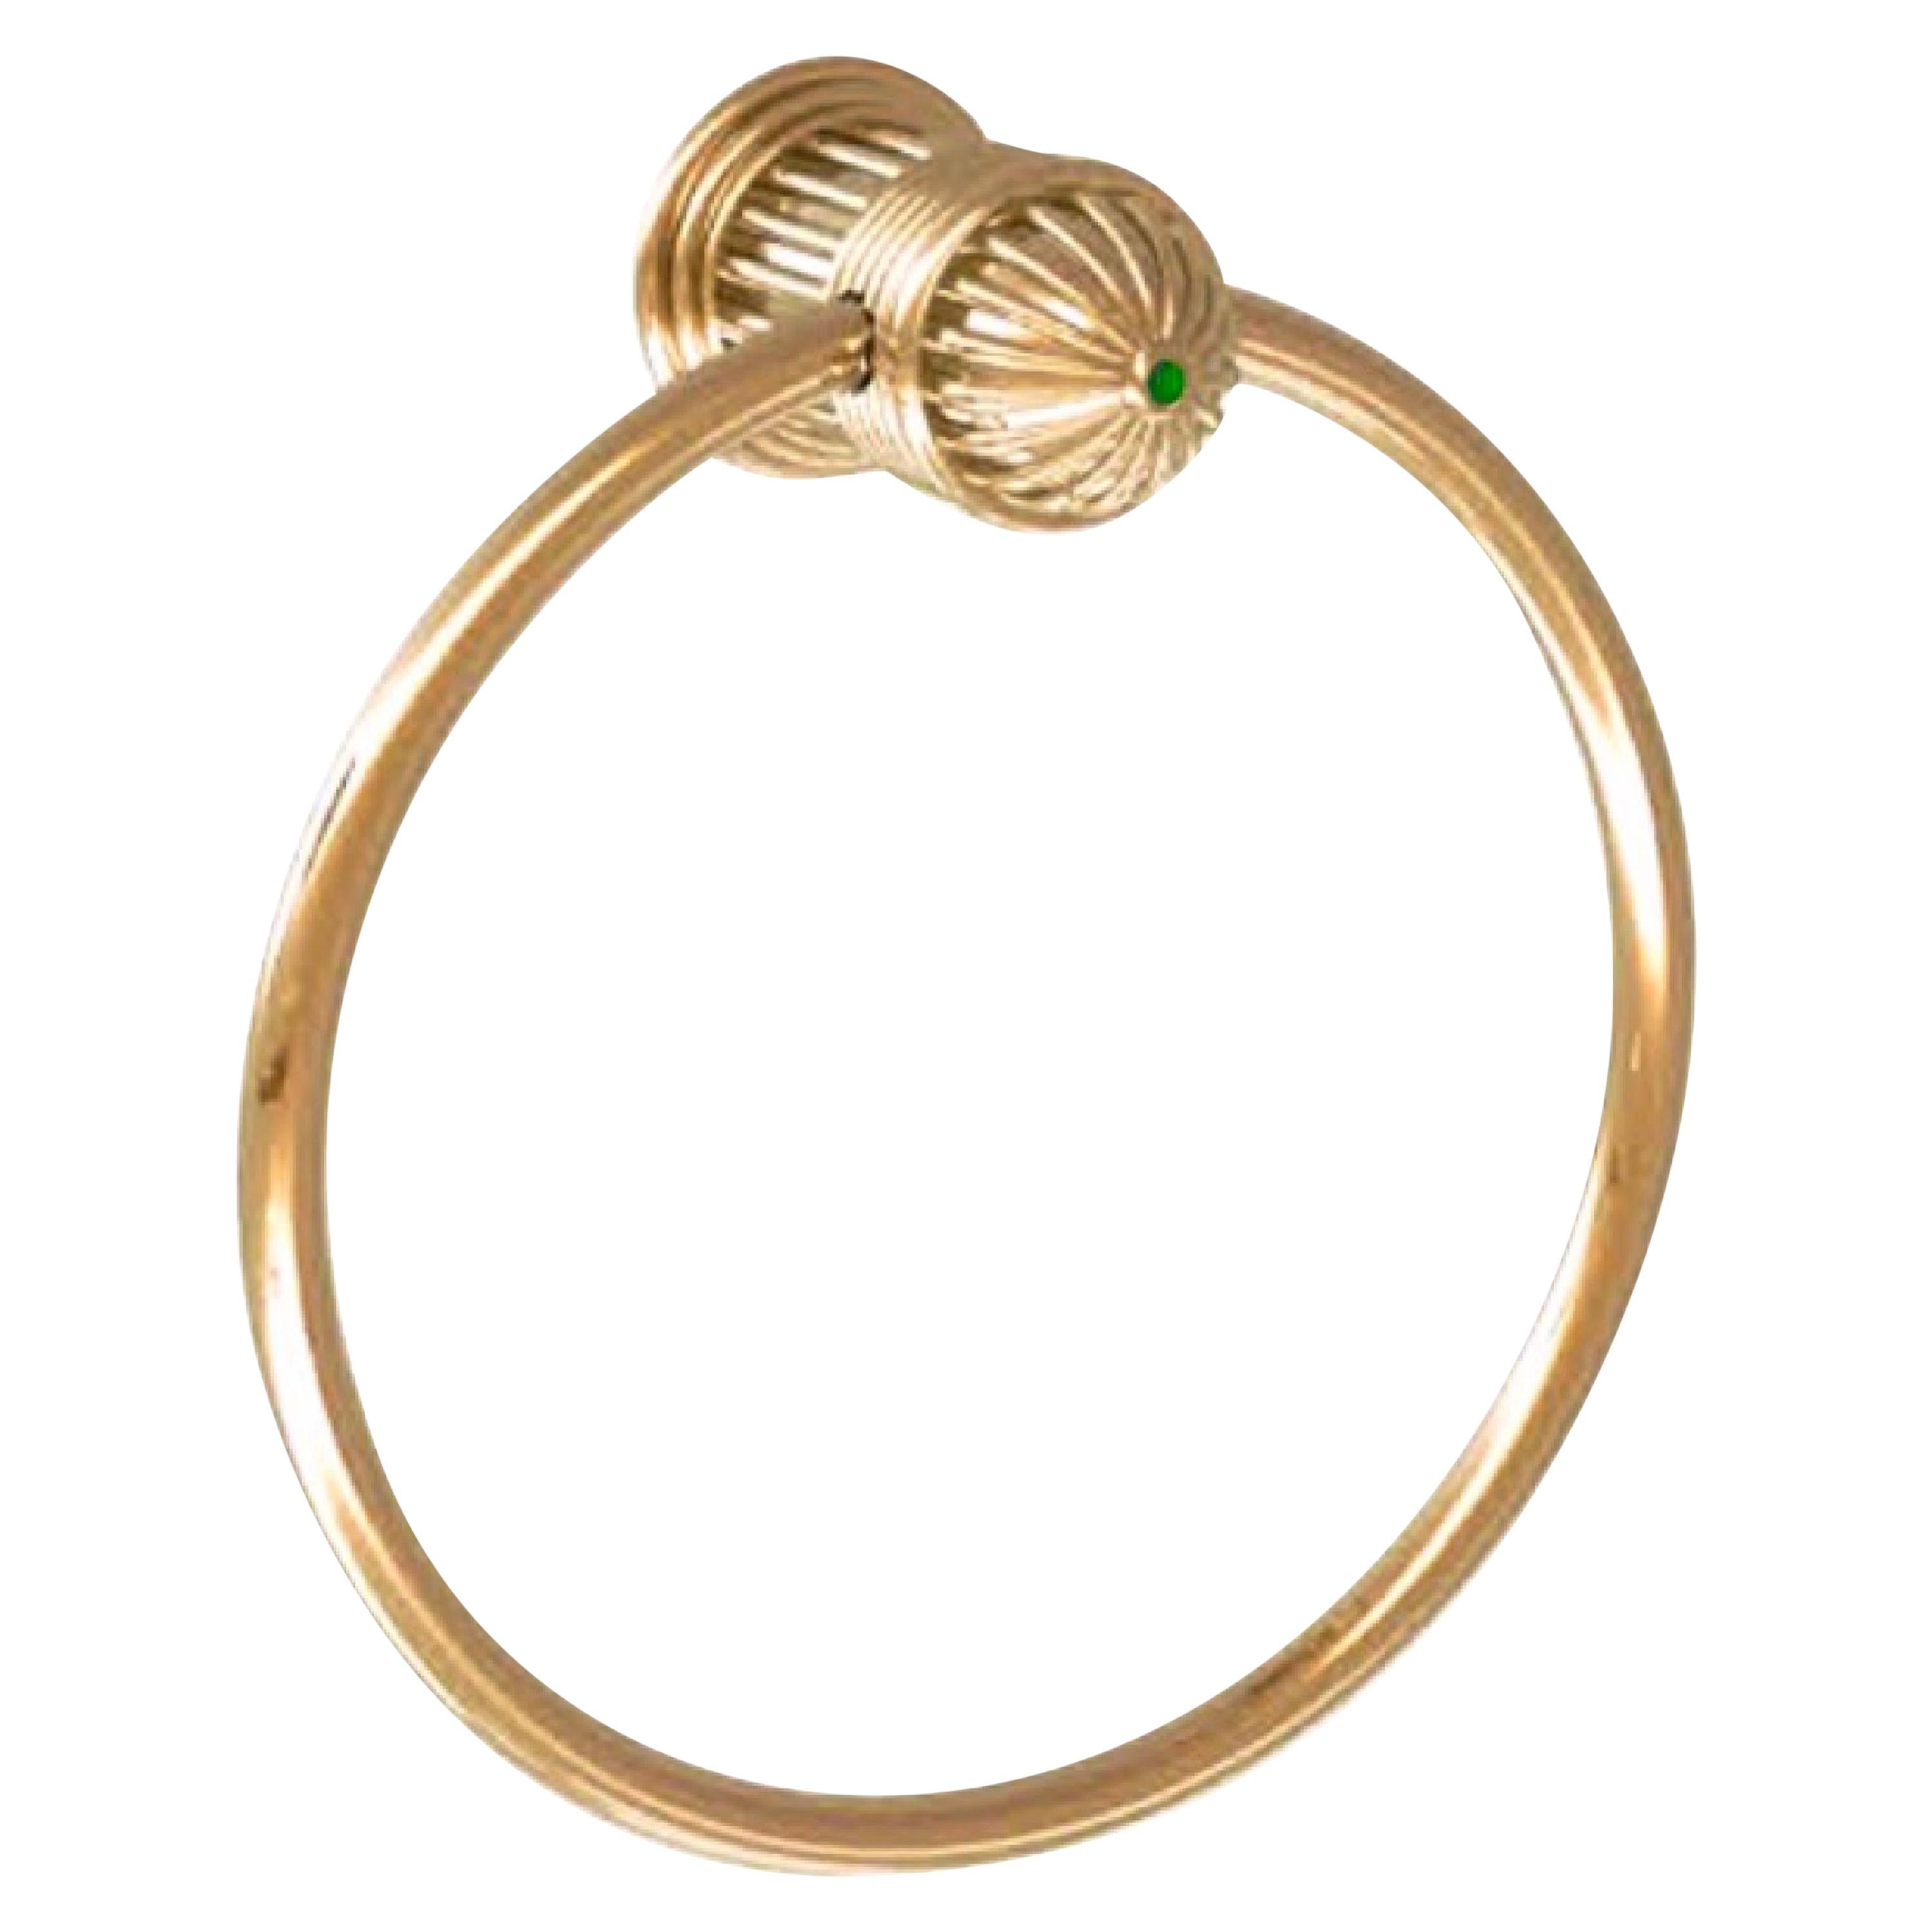 Vintage French Couture Gold and Malachite Towel Ring by Serdaneli Paris